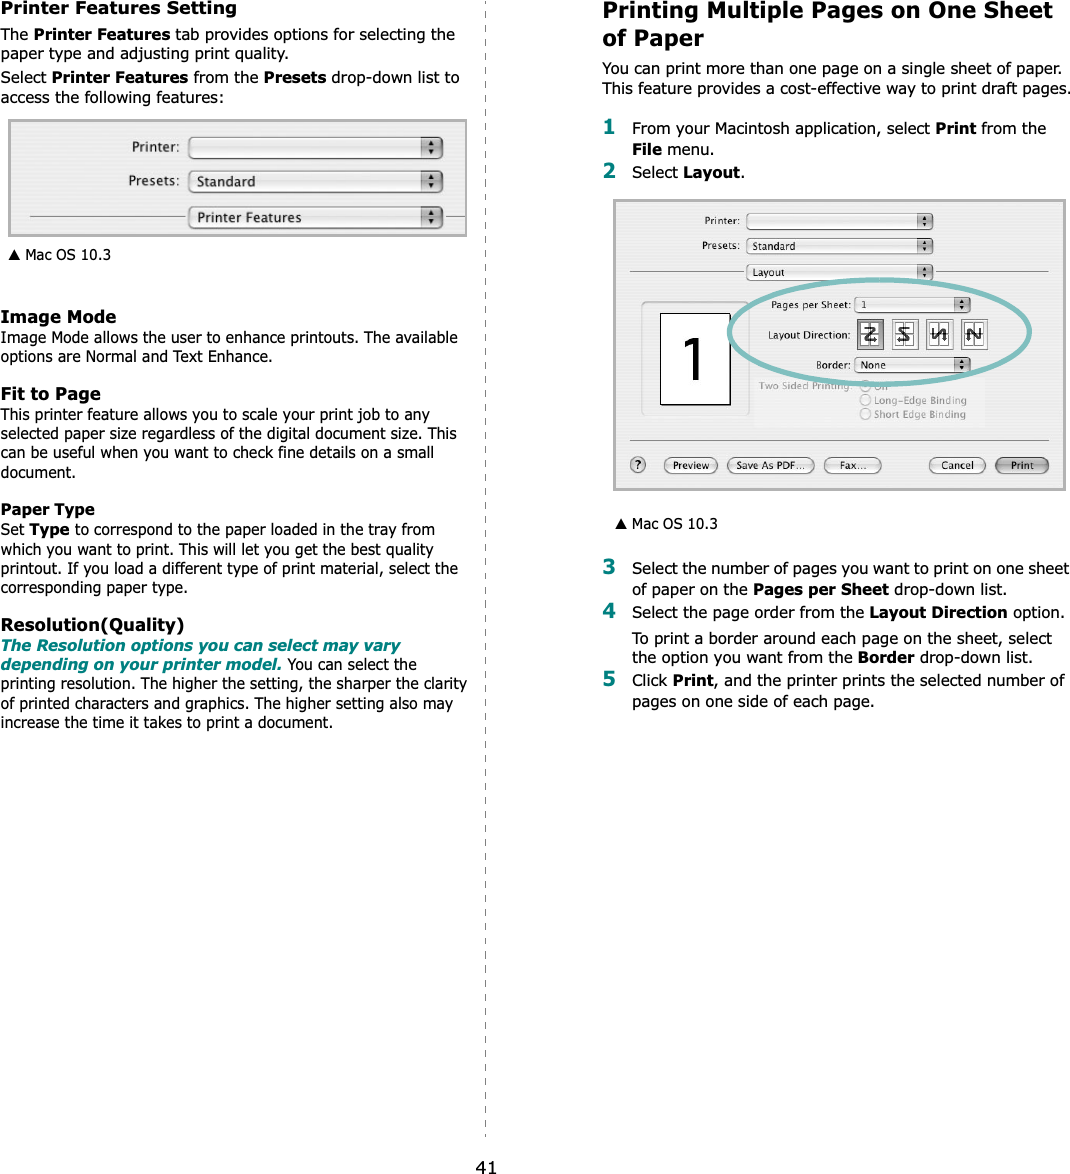 41Printer Features SettingThe Printer Features tab provides options for selecting the paper type and adjusting print quality.Select Printer Features from the Presets drop-down list to access the following features:Image ModeImage Mode allows the user to enhance printouts. The available options are Normal and Text Enhance. Fit to PageThis printer feature allows you to scale your print job to any selected paper size regardless of the digital document size. This can be useful when you want to check fine details on a small document.   Paper TypeSet Type to correspond to the paper loaded in the tray from which you want to print. This will let you get the best quality printout. If you load a different type of print material, select the corresponding paper type.  Resolution(Quality)The Resolution options you can select may vary depending on your printer model. You can select the printing resolution. The higher the setting, the sharper the clarity of printed characters and graphics. The higher setting also may increase the time it takes to print a document.  ▲ Mac OS 10.3Printing Multiple Pages on One Sheet of PaperYou can print more than one page on a single sheet of paper. This feature provides a cost-effective way to print draft pages.1From your Macintosh application, select Print from the File menu. 2Select Layout.3Select the number of pages you want to print on one sheet of paper on the Pages per Sheet drop-down list.4Select the page order from the Layout Direction option.To print a border around each page on the sheet, select the option you want from the Border drop-down list.5Click Print, and the printer prints the selected number of pages on one side of each page.▲ Mac OS 10.3